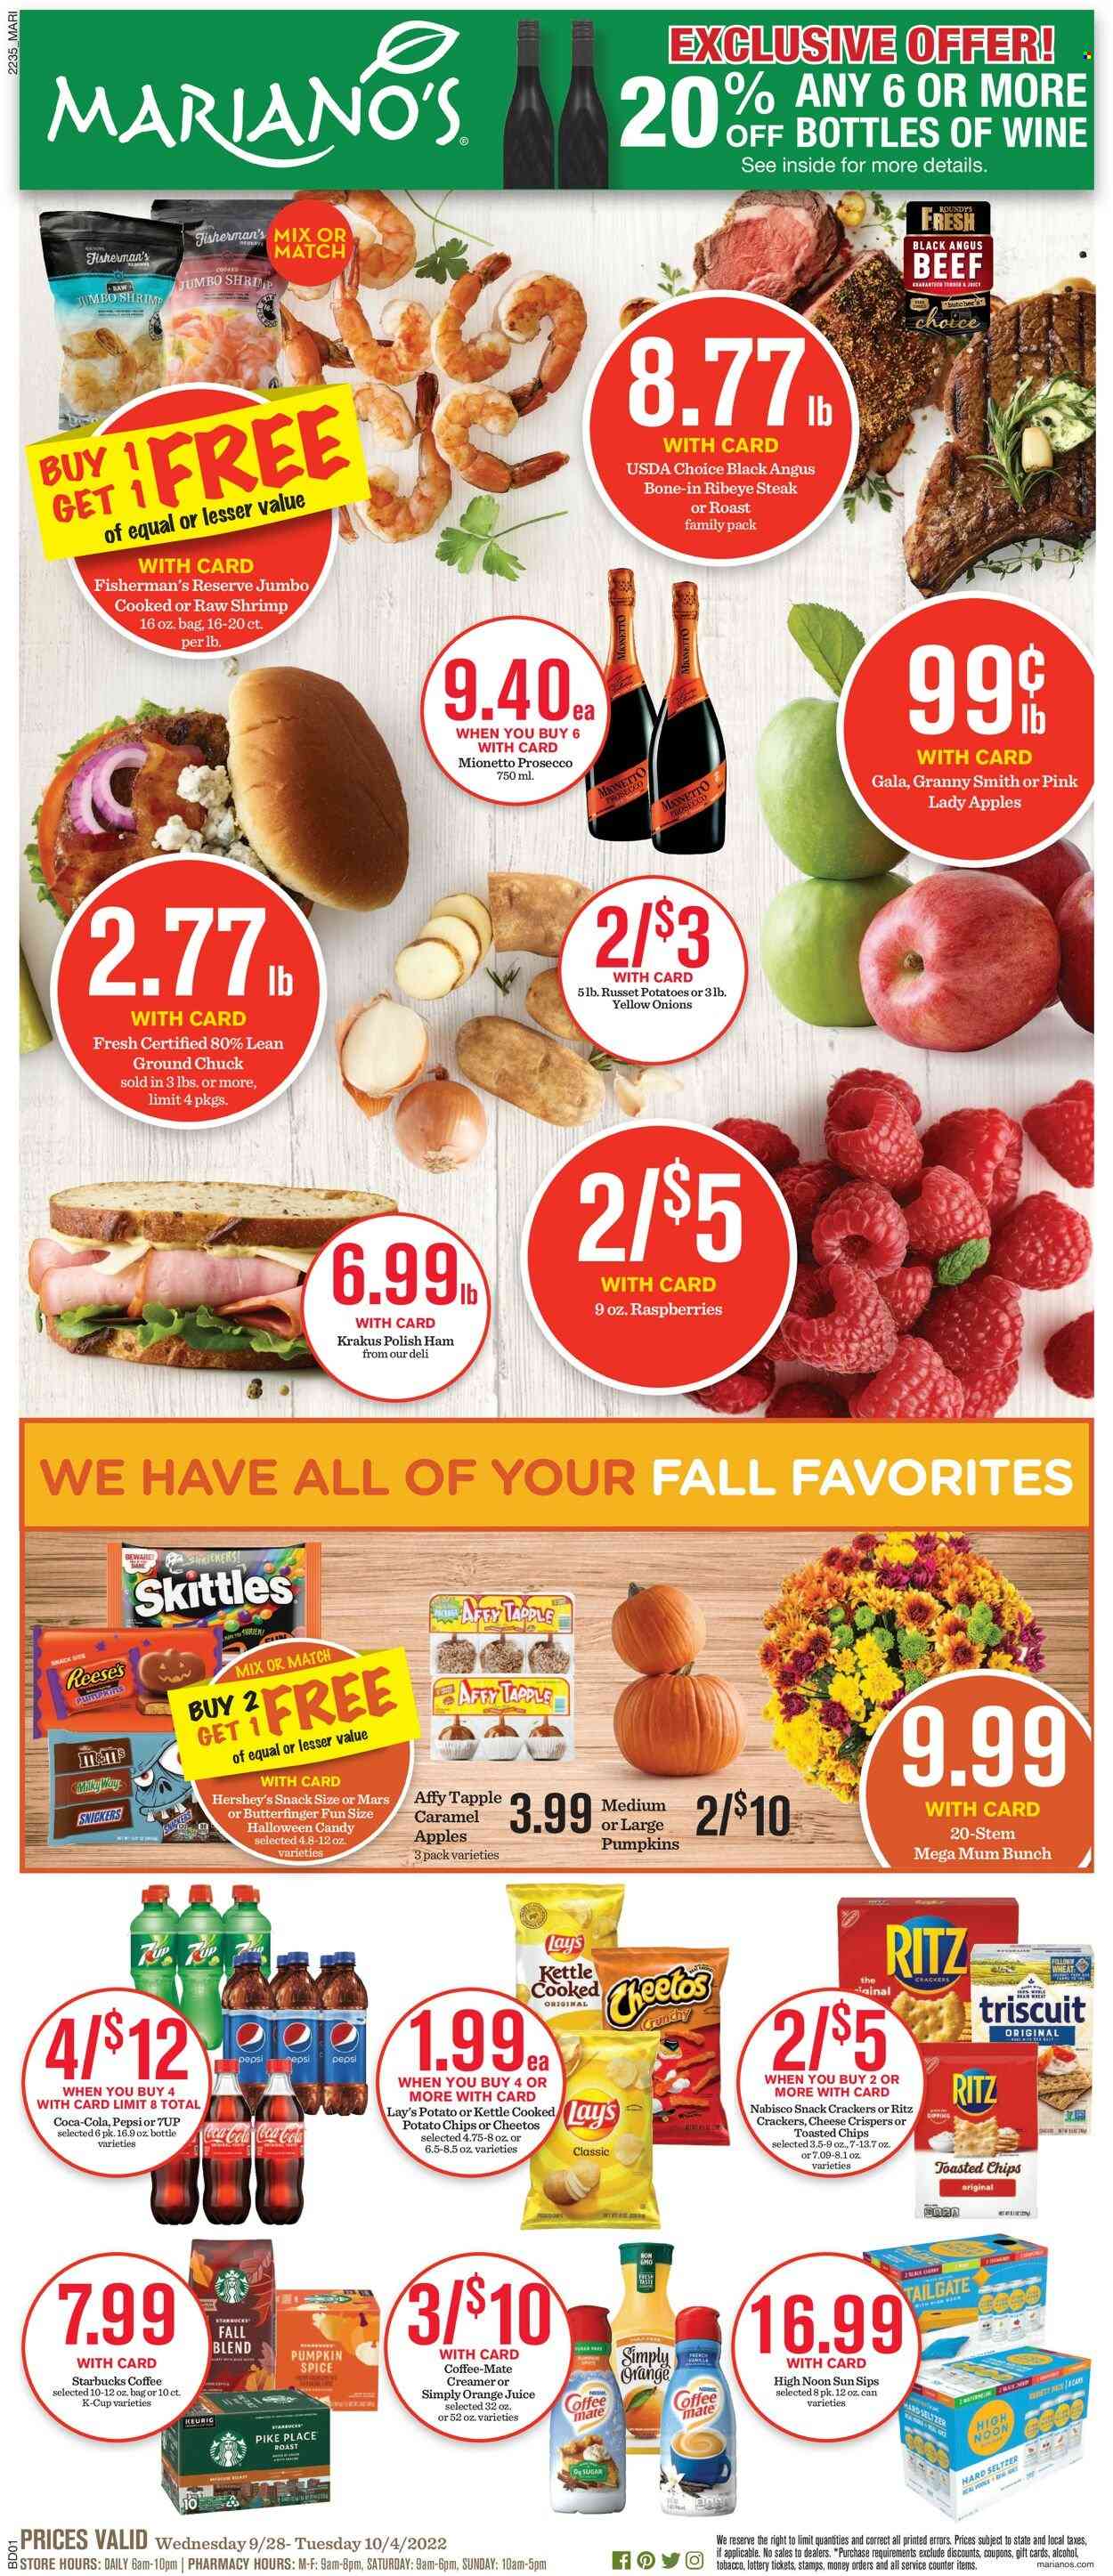 thumbnail - Mariano’s Flyer - 09/28/2022 - 10/04/2022 - Sales products - russet potatoes, onion, apples, Gala, Granny Smith, Pink Lady, shrimps, ham, Coffee-Mate, creamer, Reese's, Hershey's, snack, Milky Way, Snickers, Mars, crackers, Skittles, RITZ, potato chips, Cheetos, chips, Lay’s, sugar, spice, caramel, Coca-Cola, Pepsi, orange juice, juice, 7UP, Starbucks, coffee capsules, K-Cups, Keurig, prosecco, wine, Hard Seltzer, beef meat, beef steak, ground chuck, steak, bone-in ribeye, ribeye steak, Halloween. Page 1.